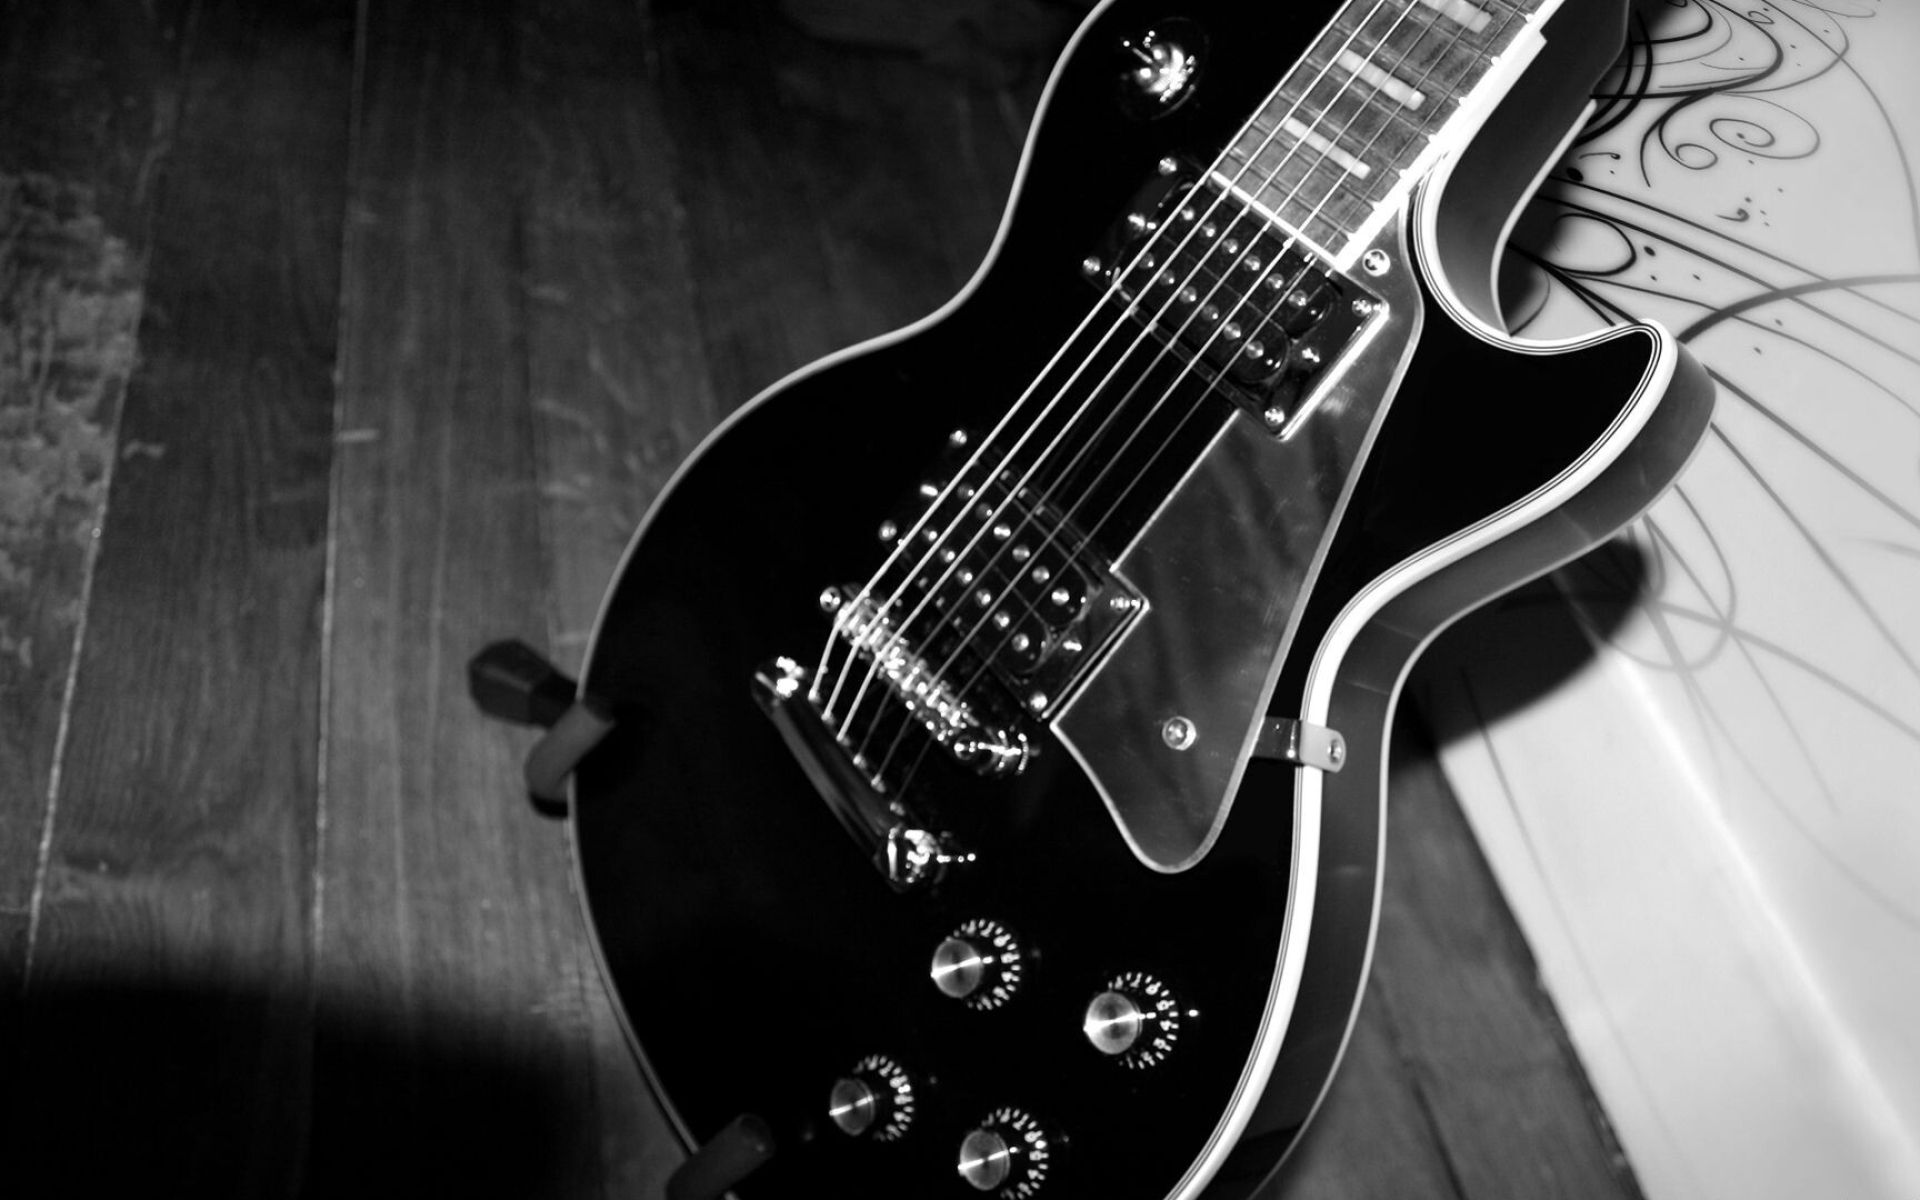 Gibson Guitar: The company's production are often associated with classic rock and blues music. 1920x1200 HD Wallpaper.